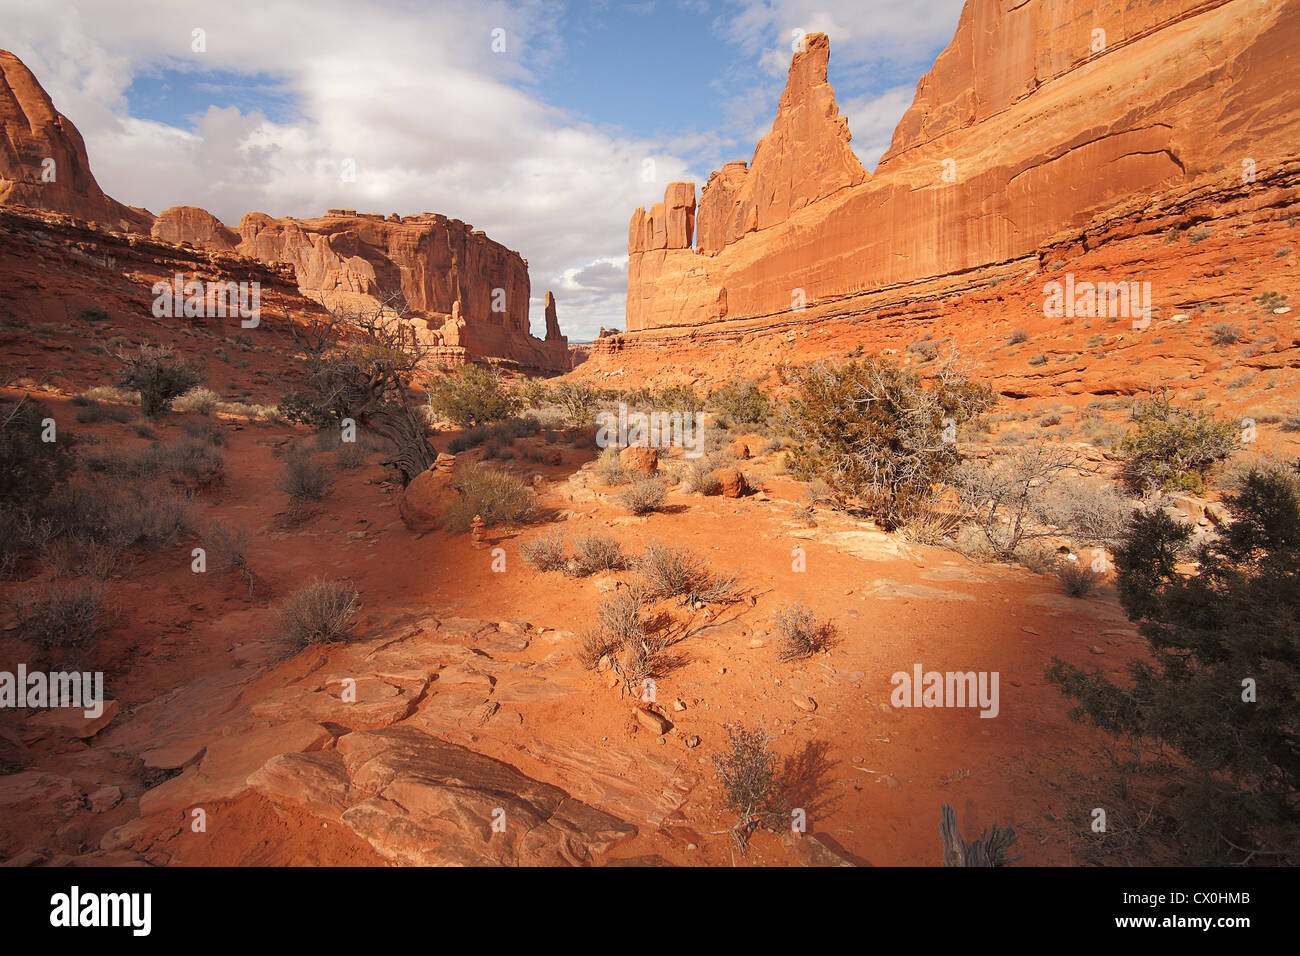 Sandstone monuments along the Park Avenue trail in Arches National Park near Moab, Utah Stock Photo